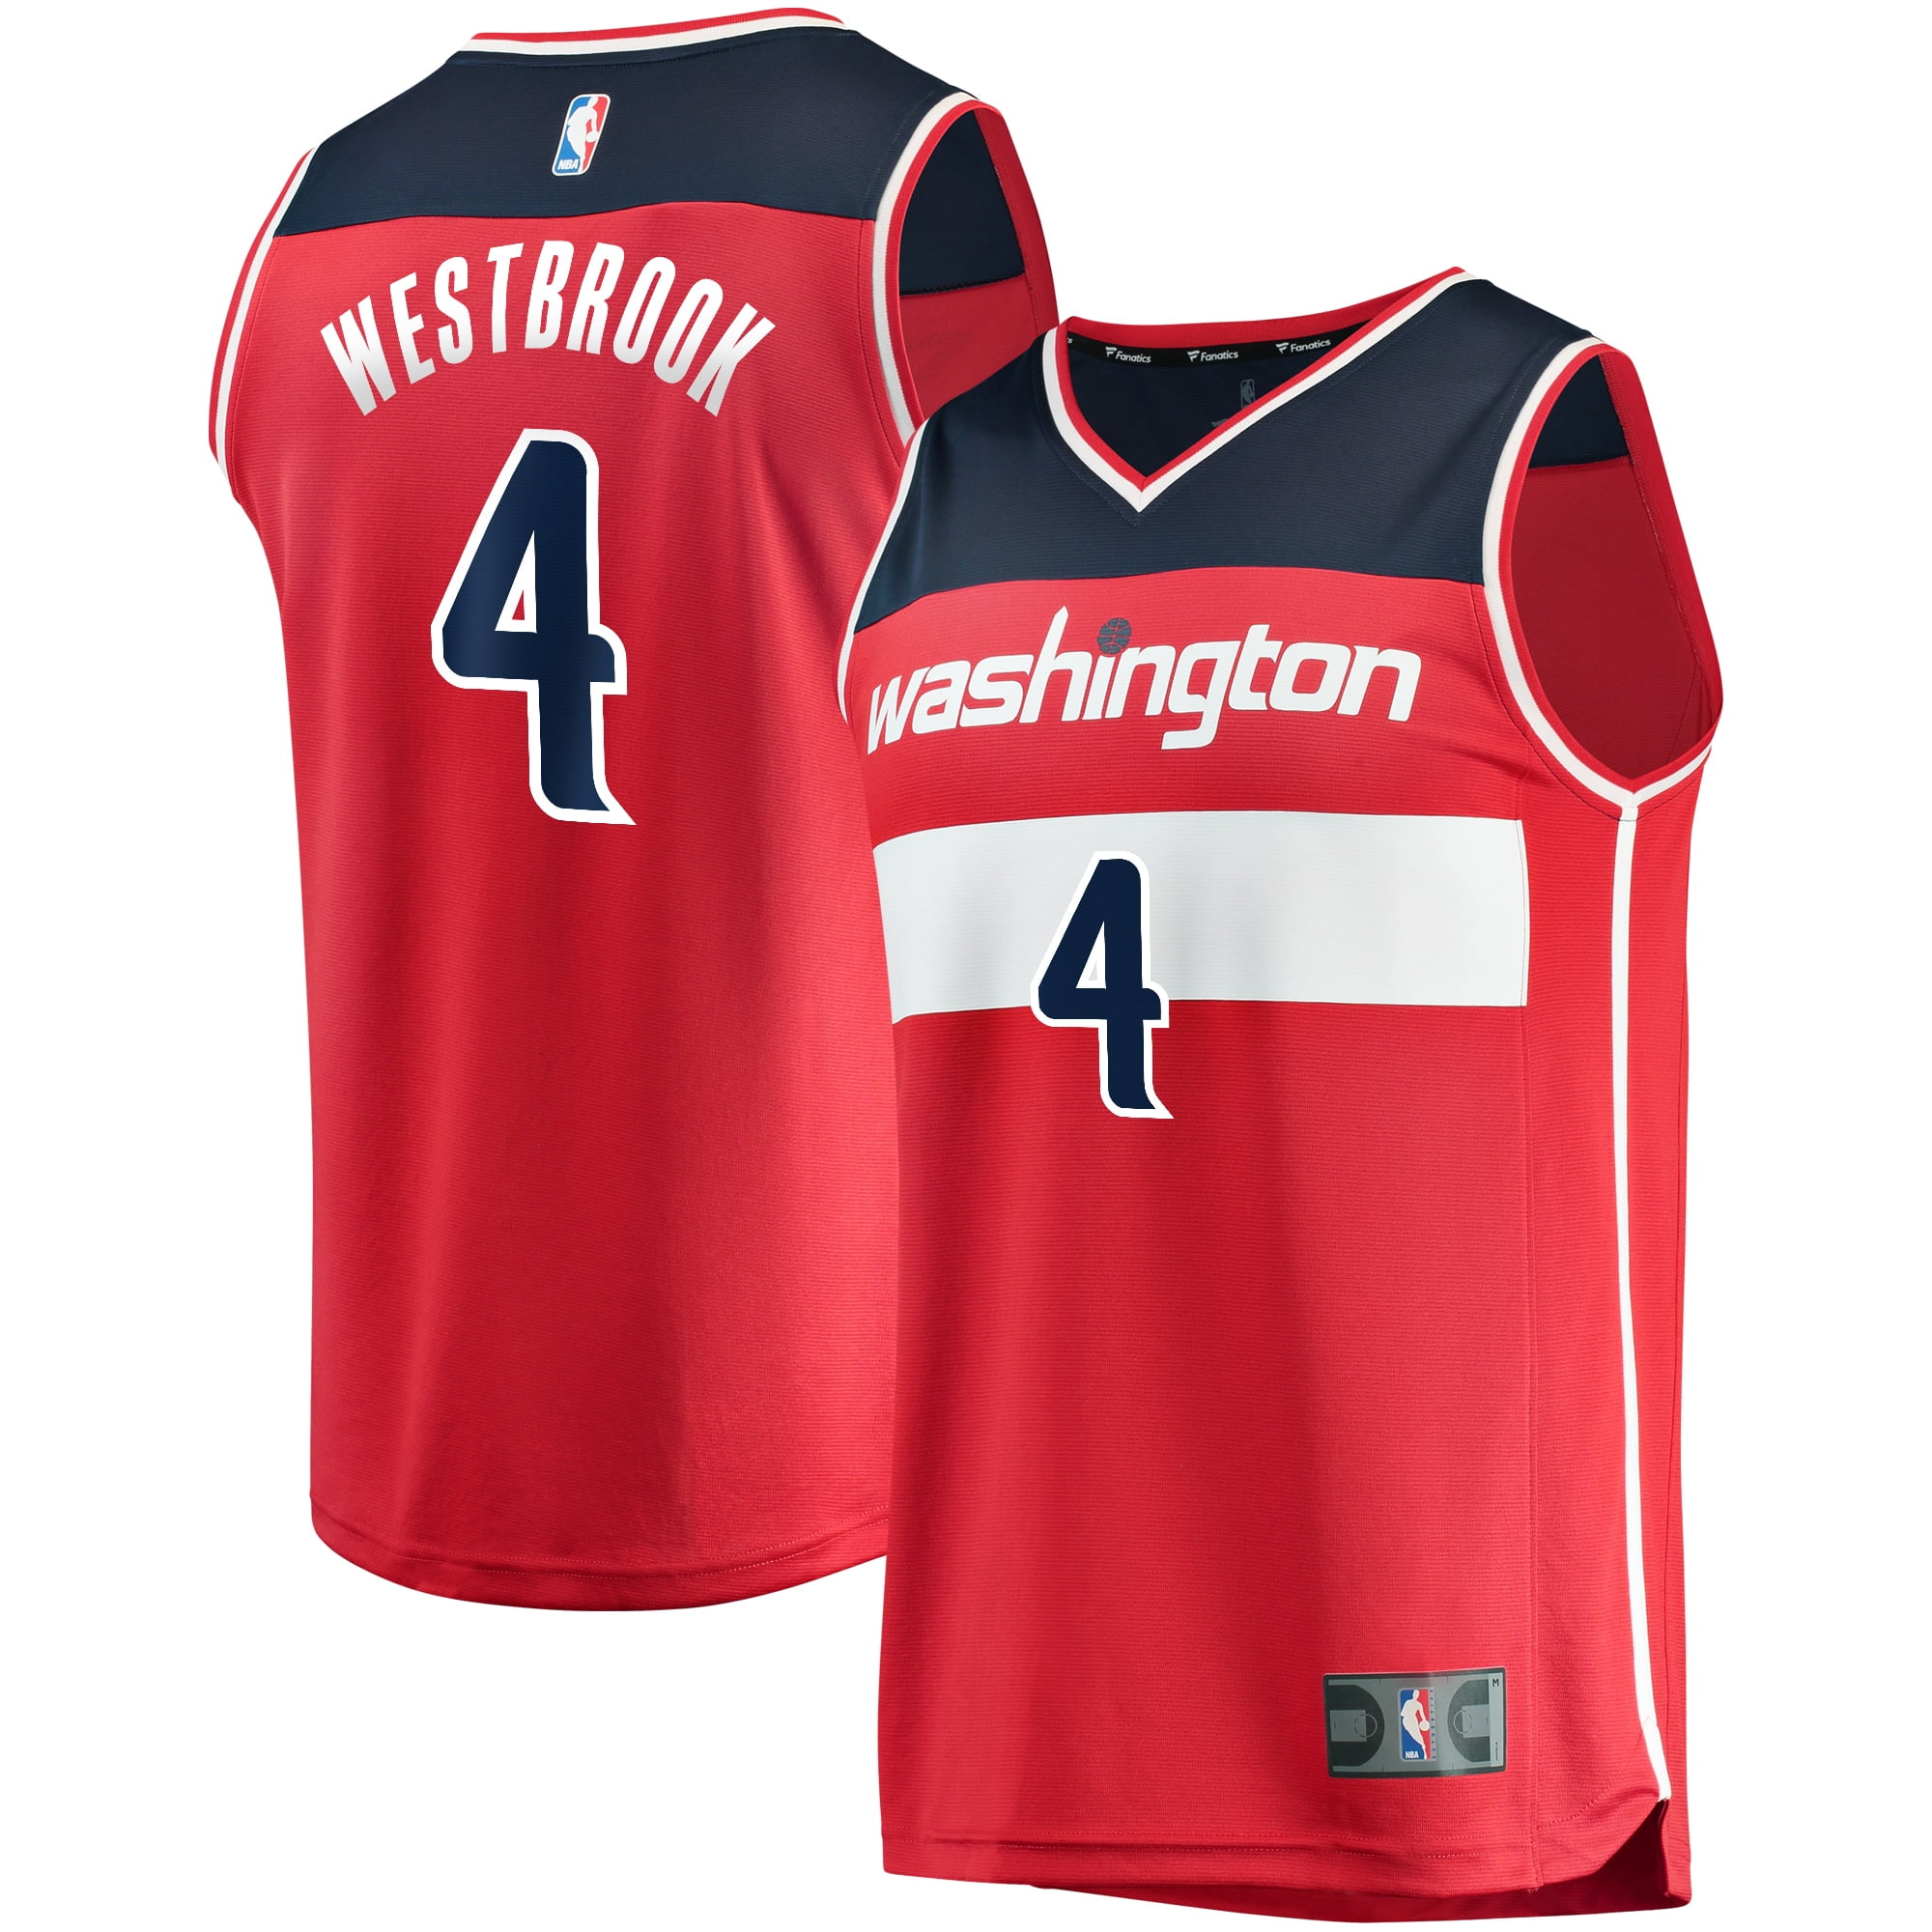 russell westbrook wizards jersey